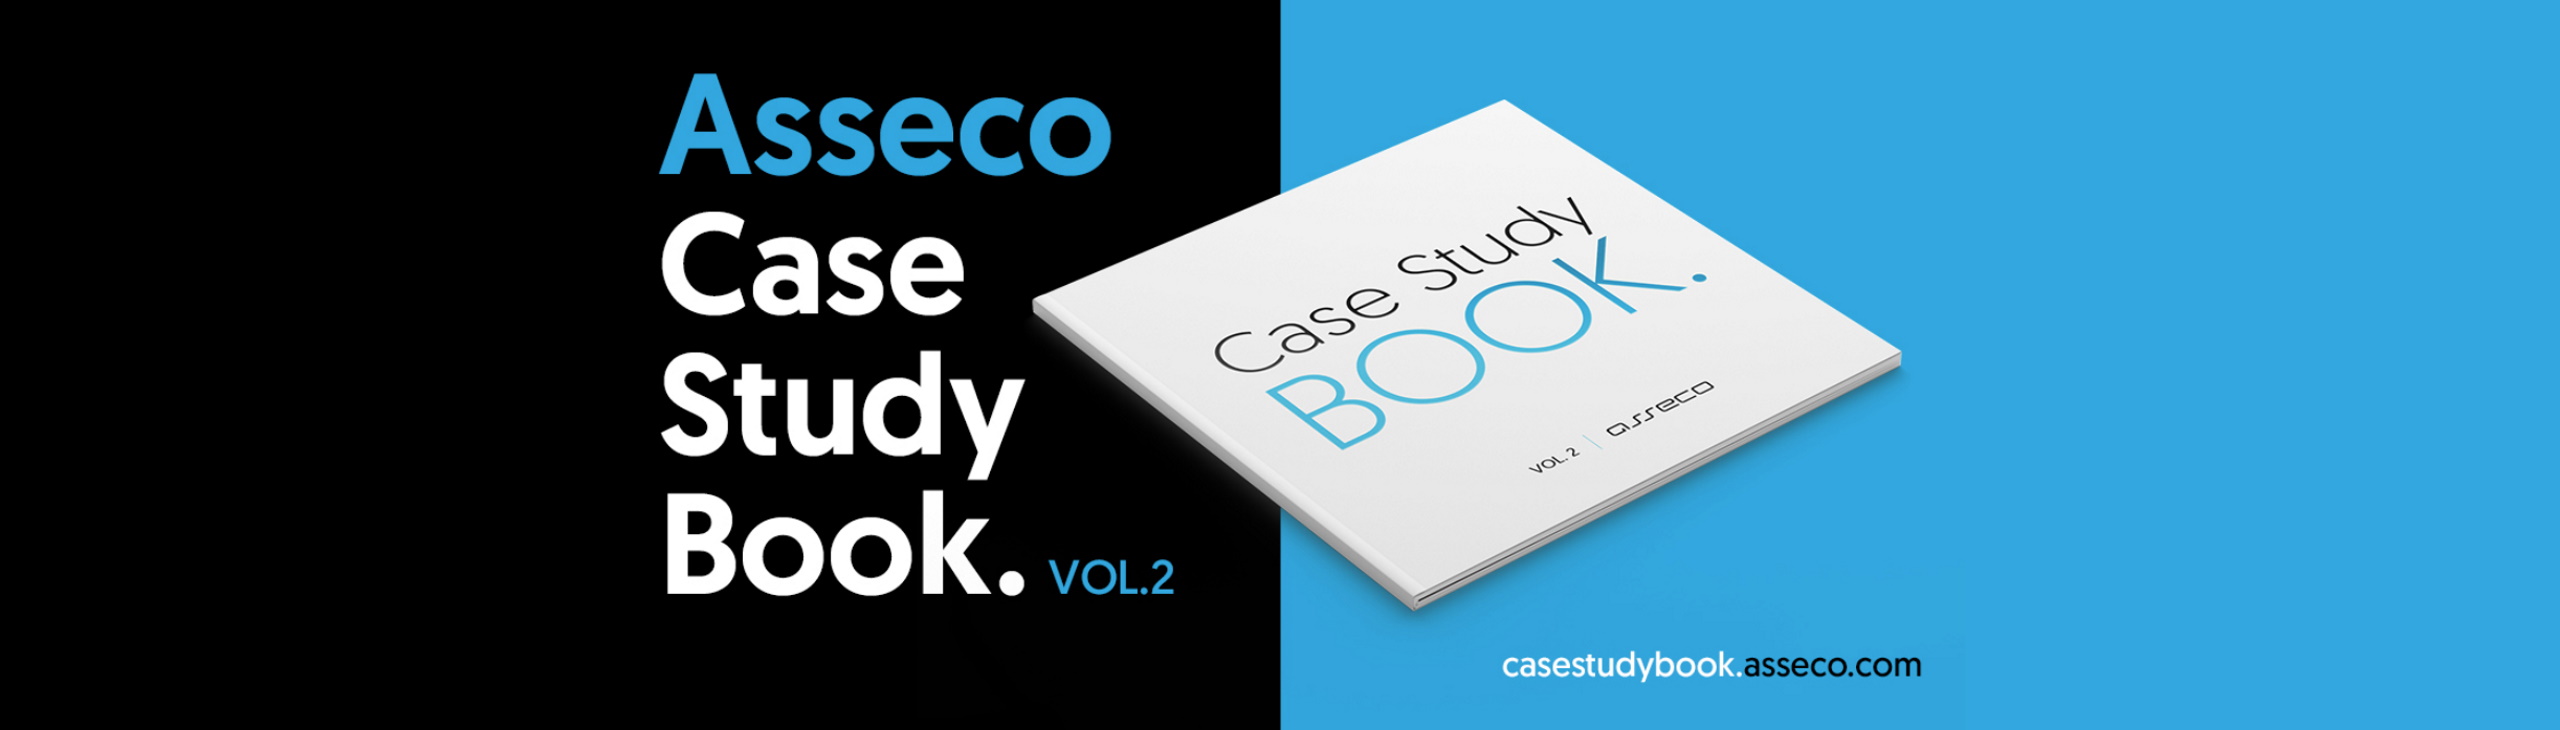 Asseco Case Study Book